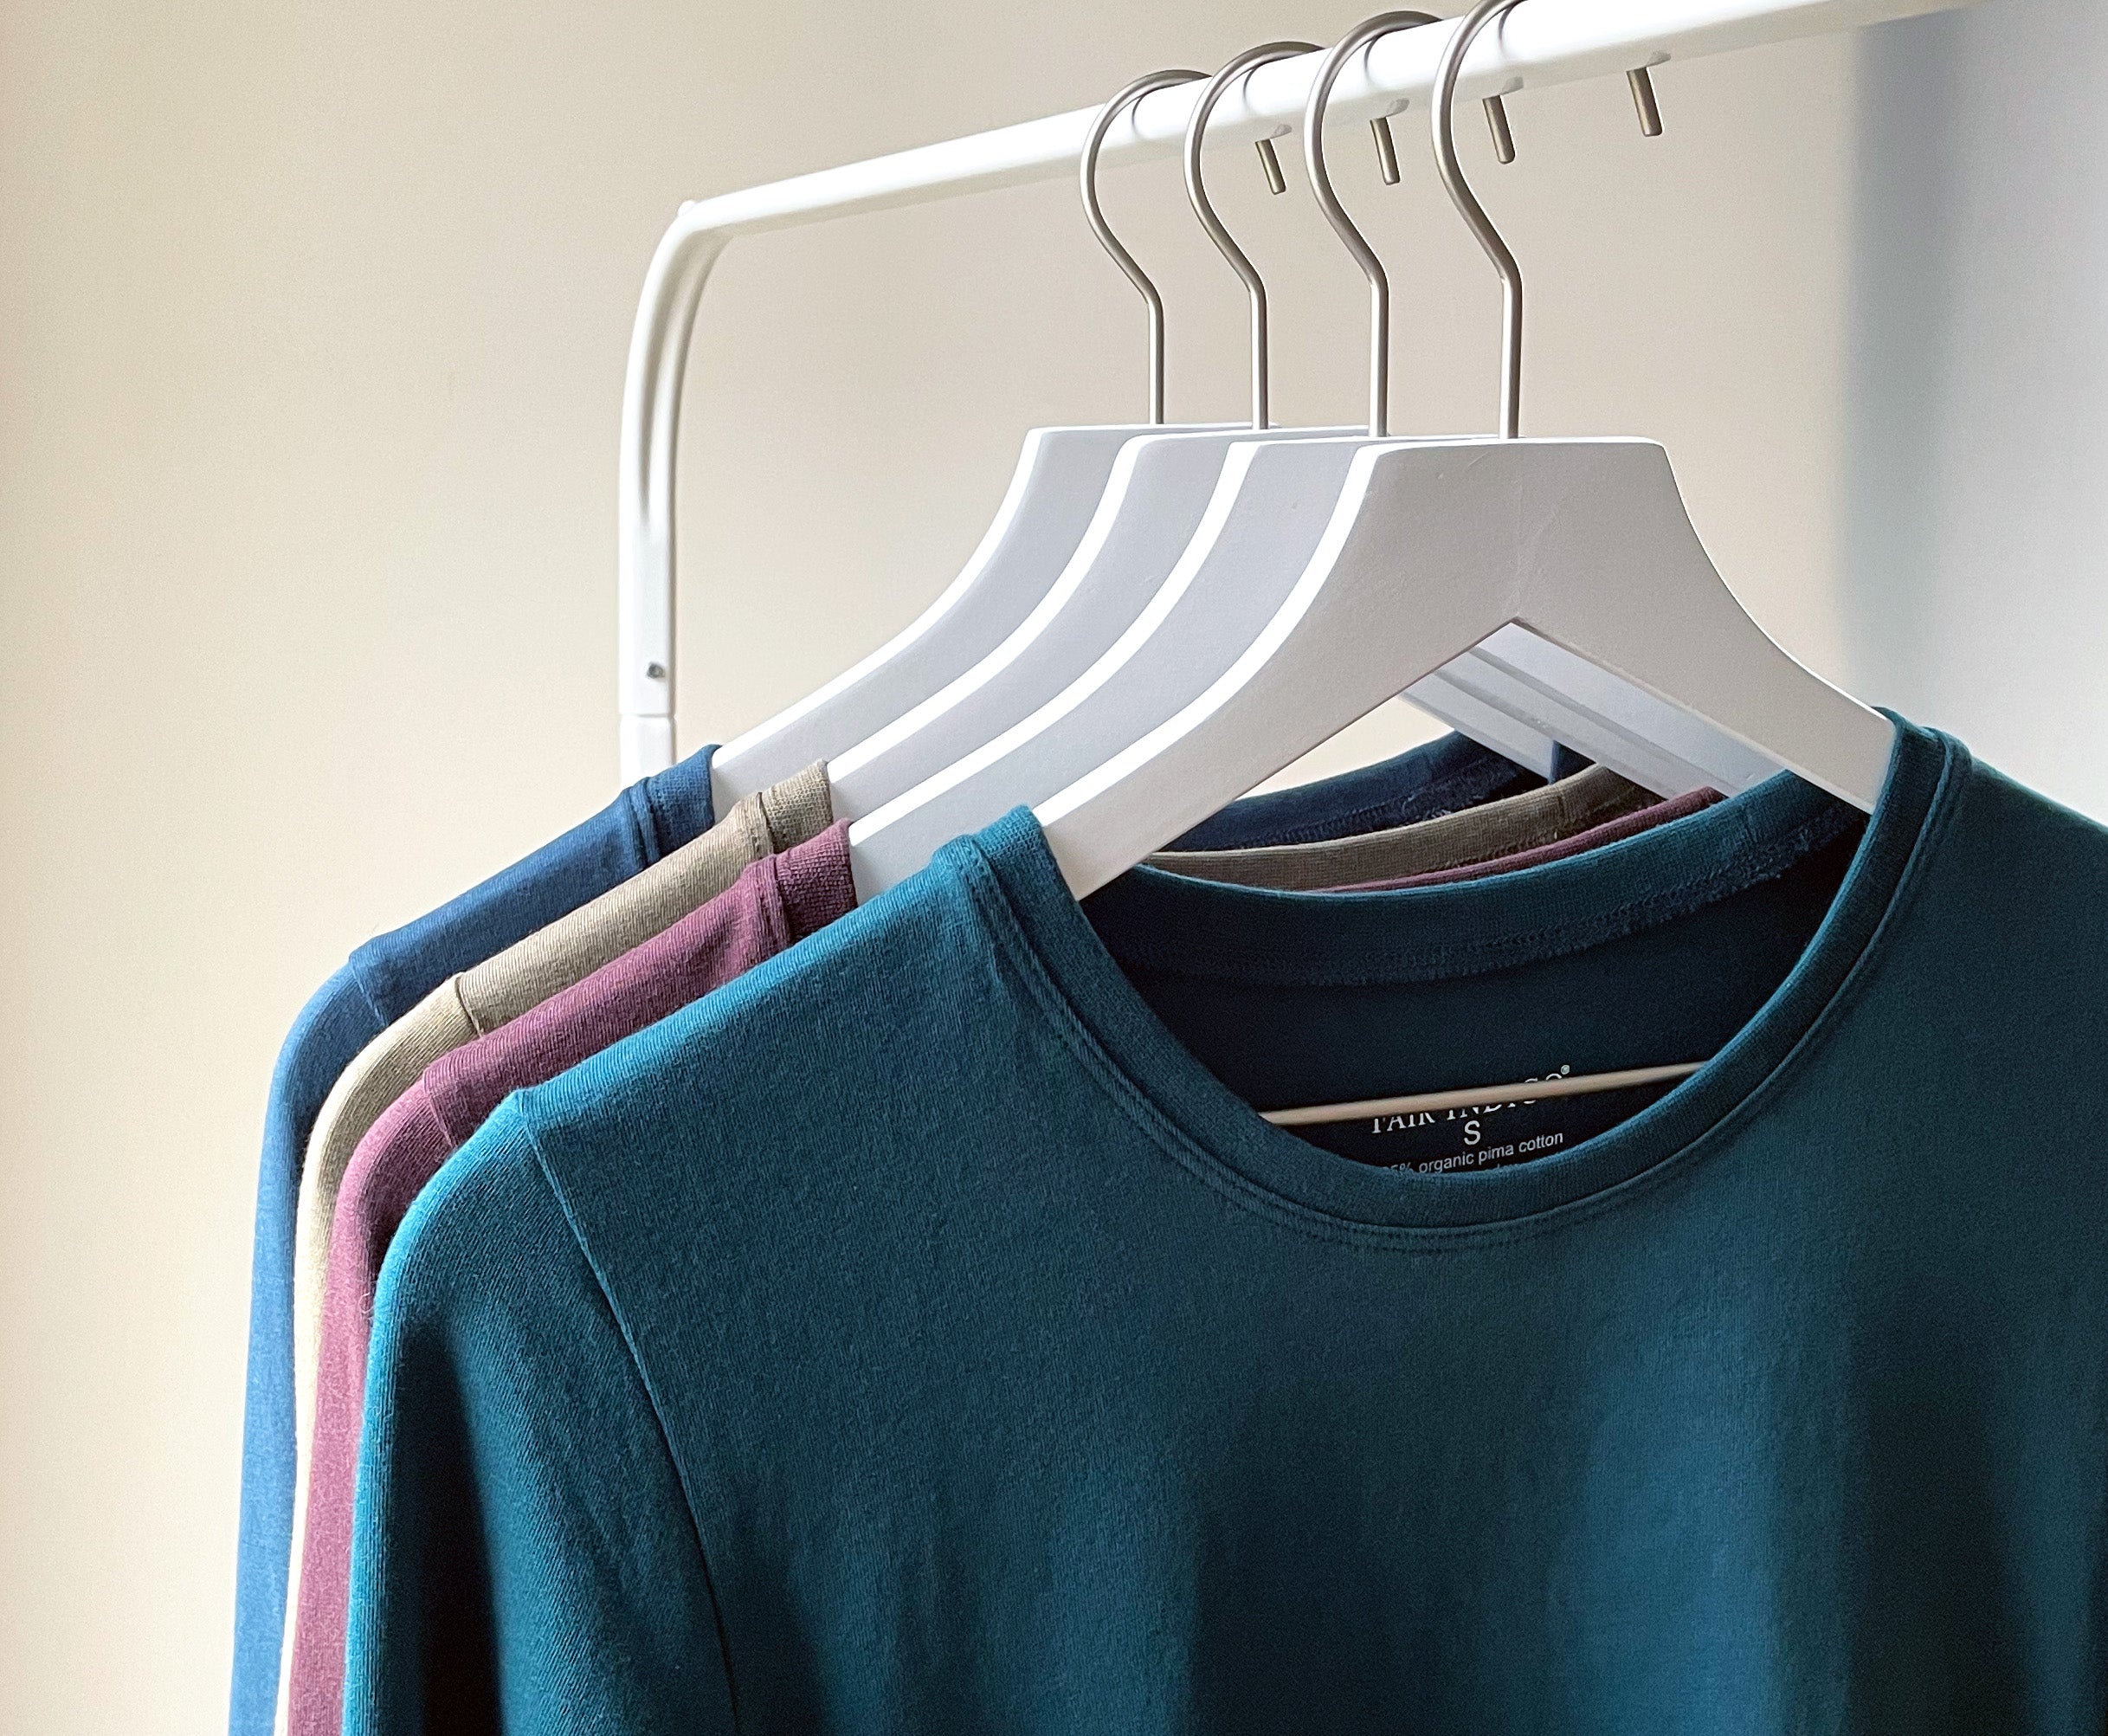 5 Tips to Prevent Cotton Clothing from Shrinking in the Dryer – Fair Indigo